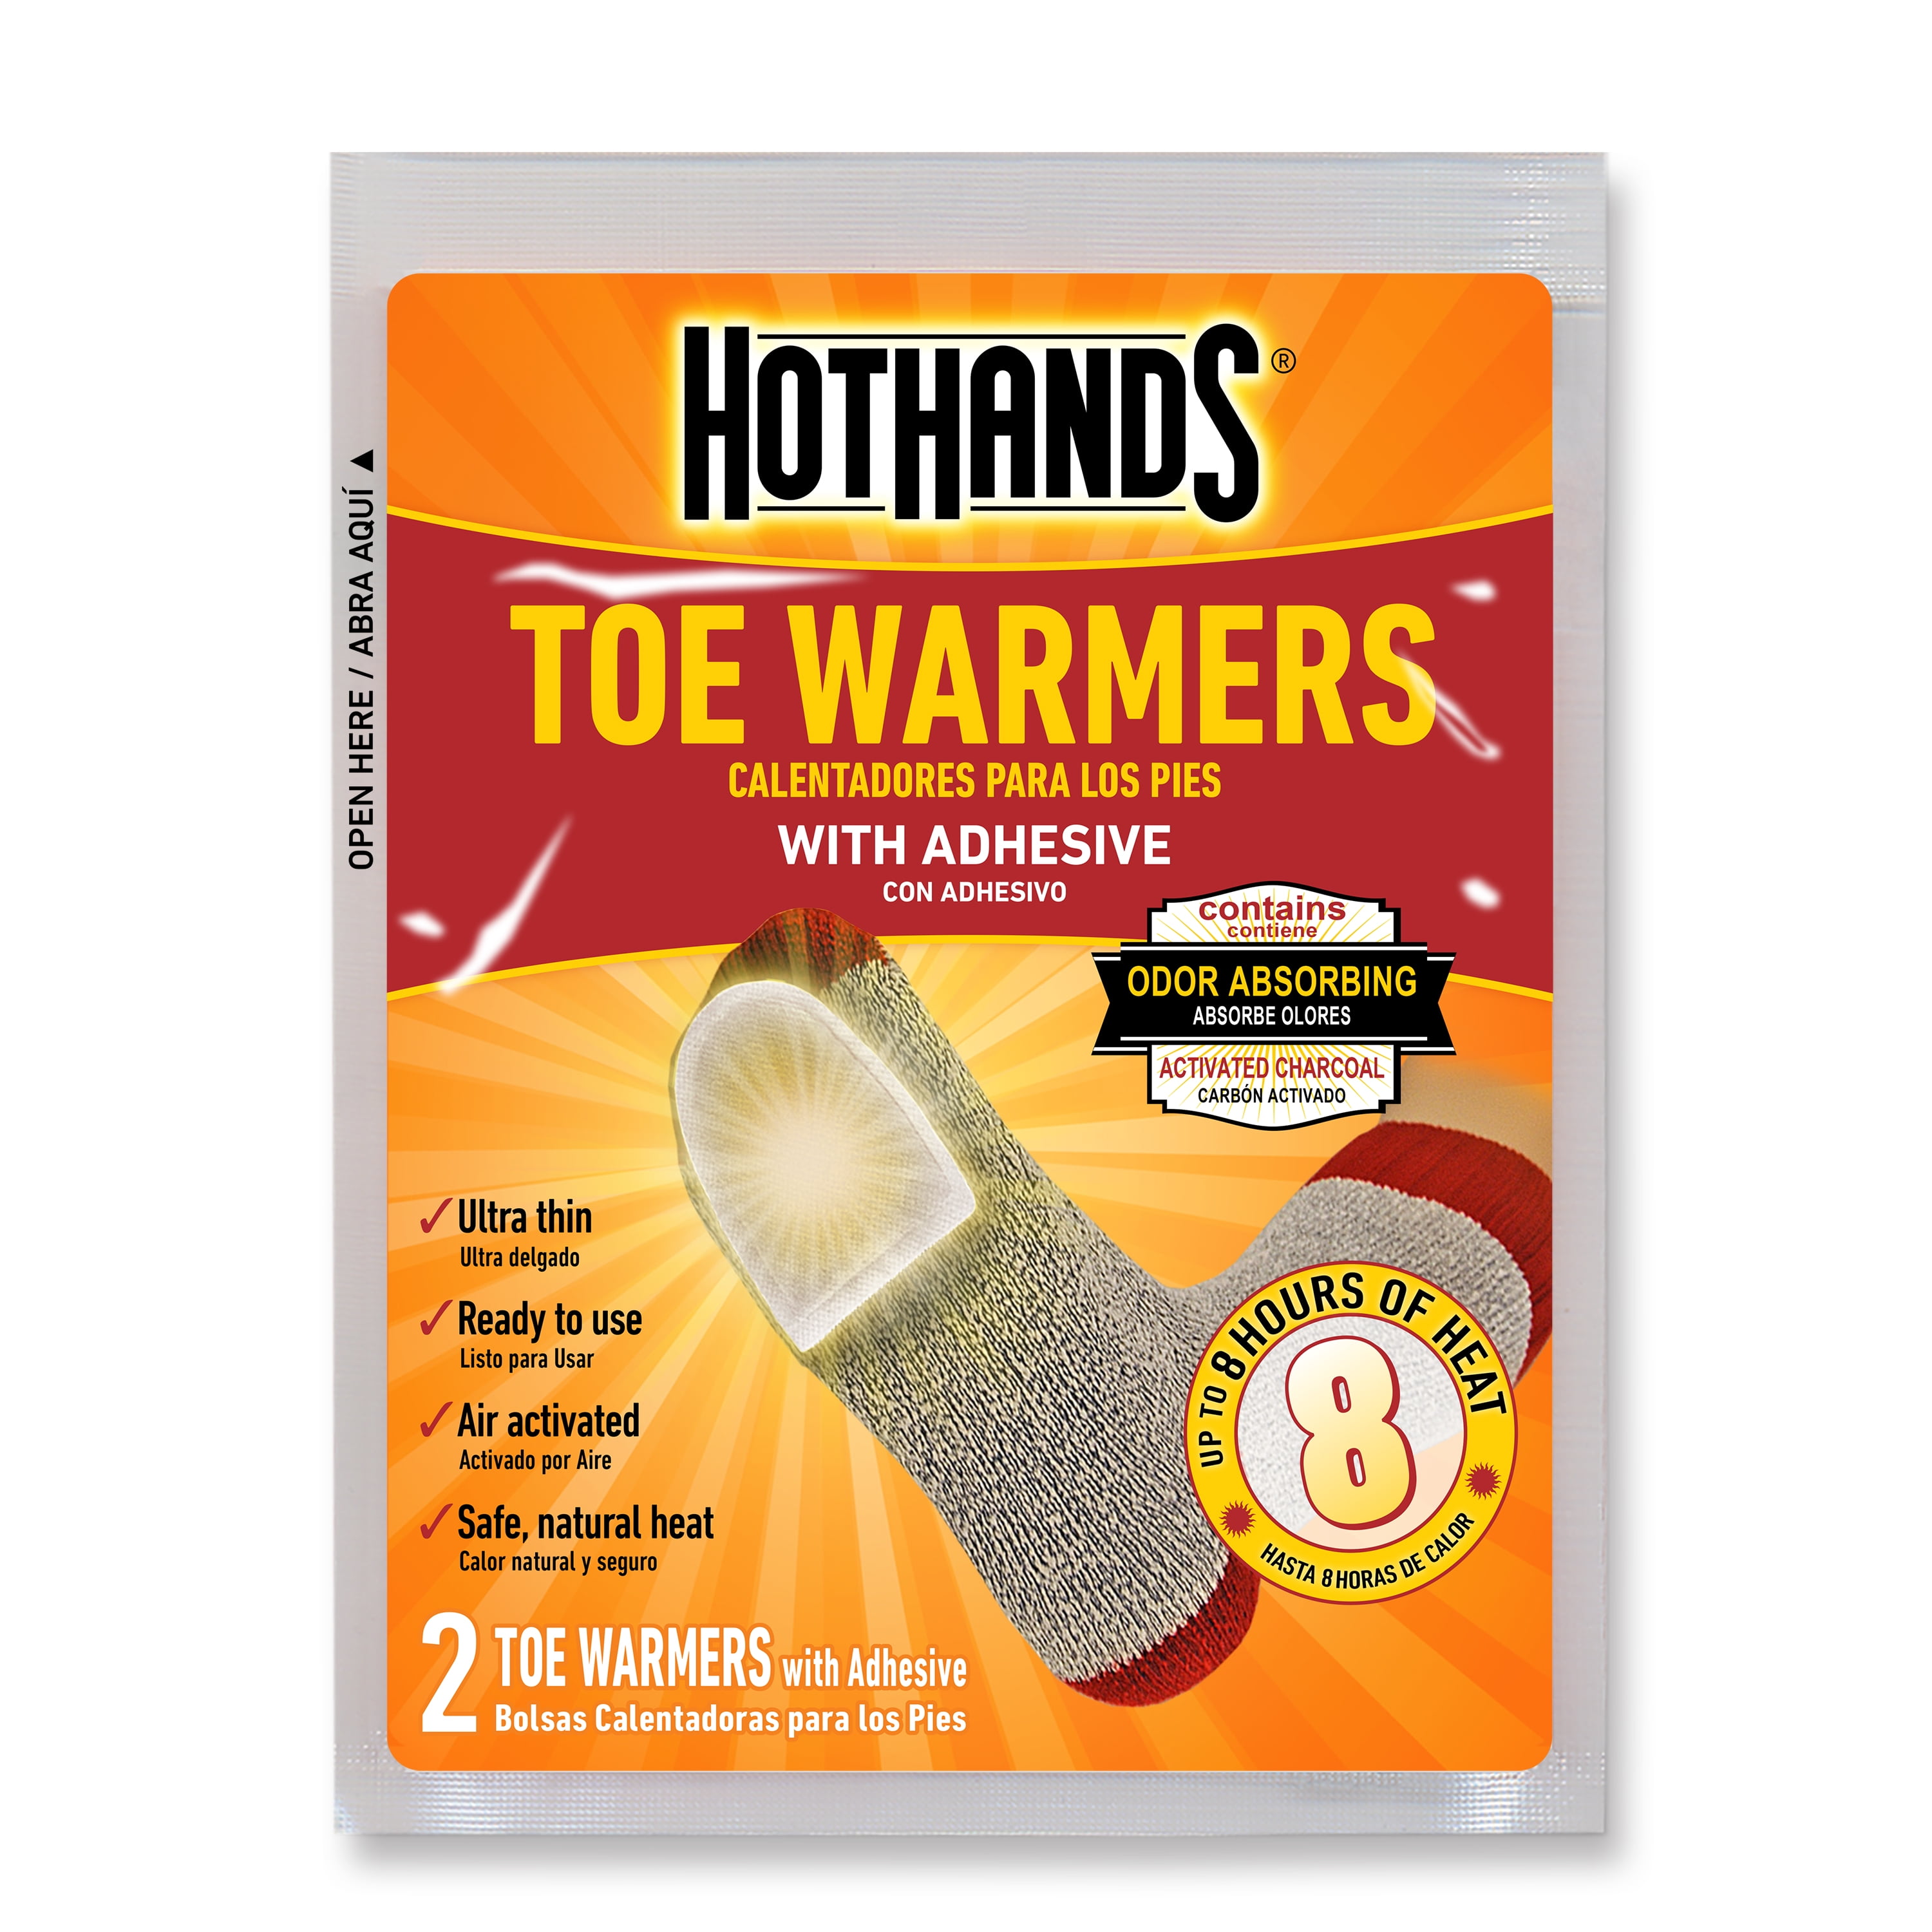 7 Pairs of Toe Warmers HotHands Toe Warmer Value Pack 